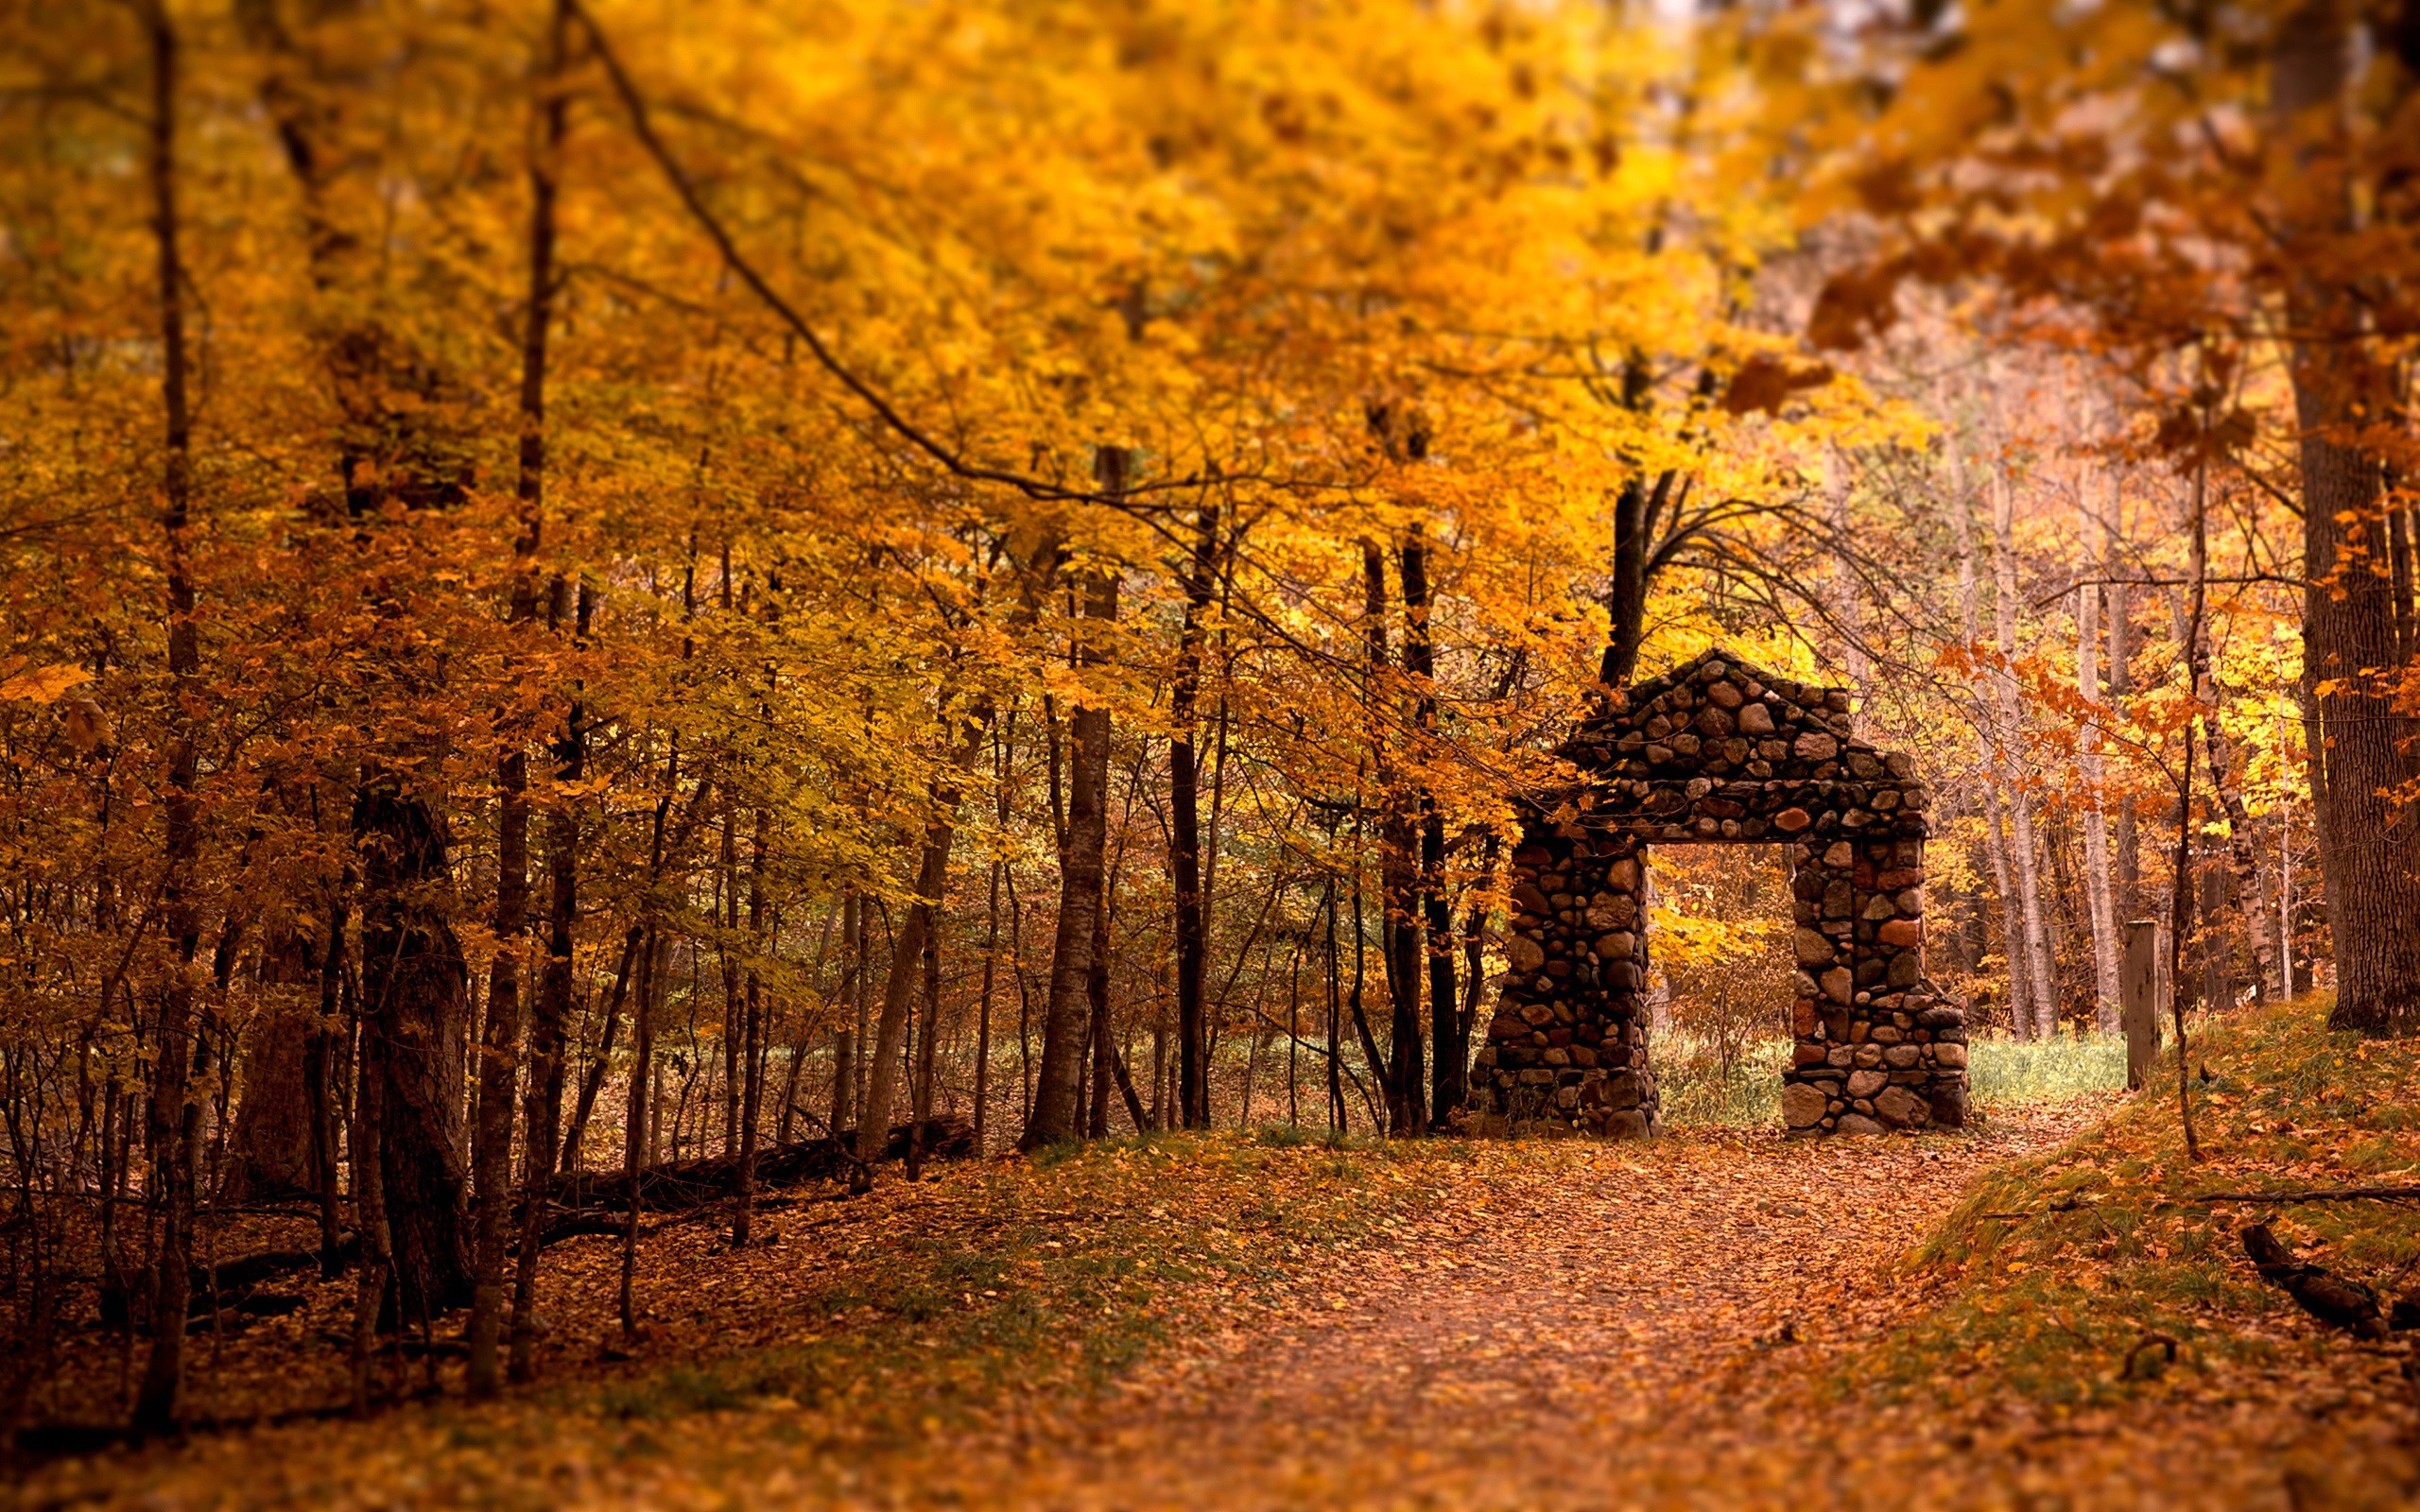 General 2560x1600 nature architecture trees forest old building ruins fall orange